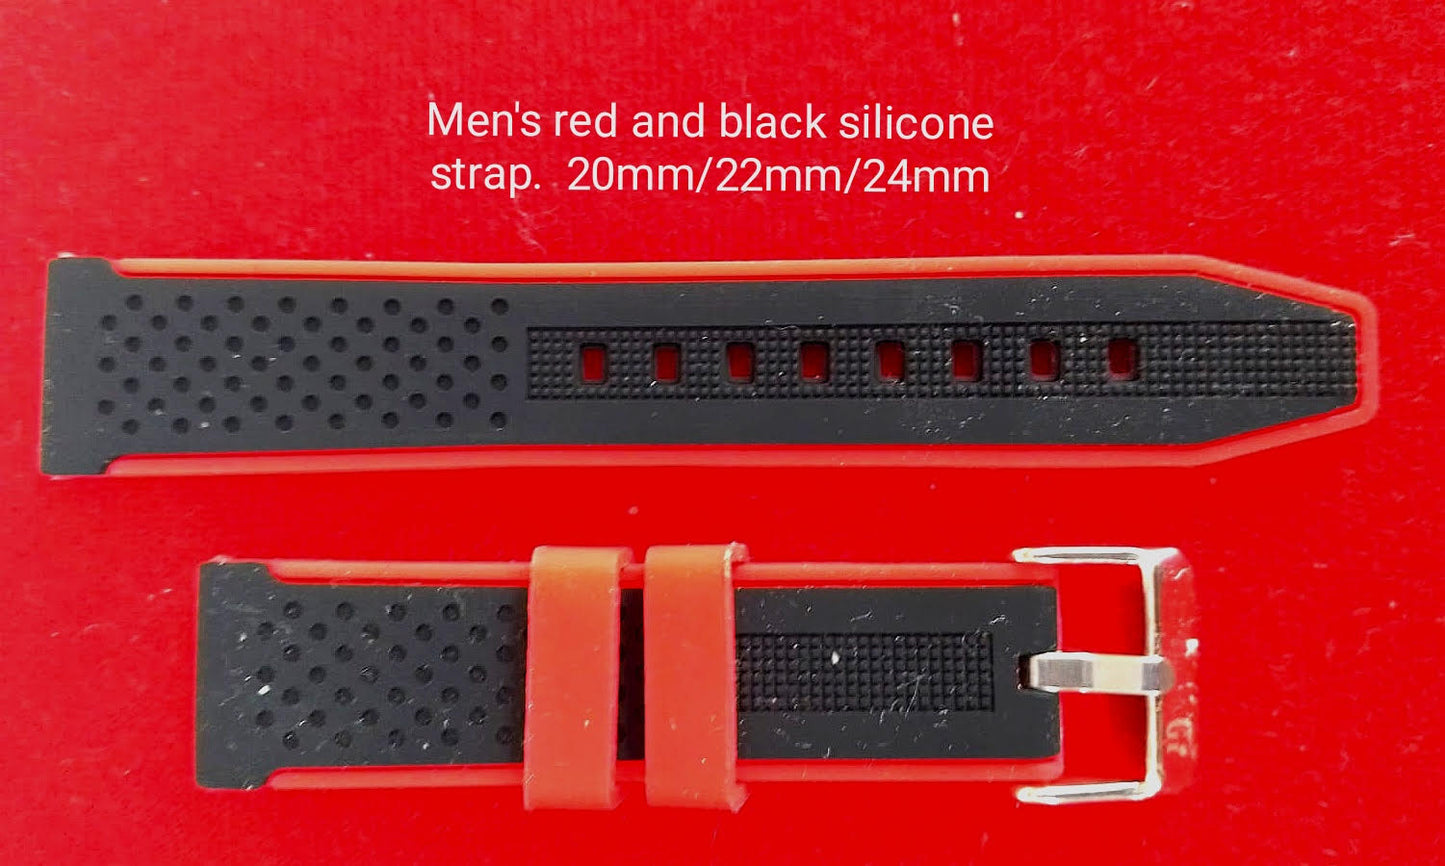 Men's red and black silicone strap 20mm/22mm/24mm